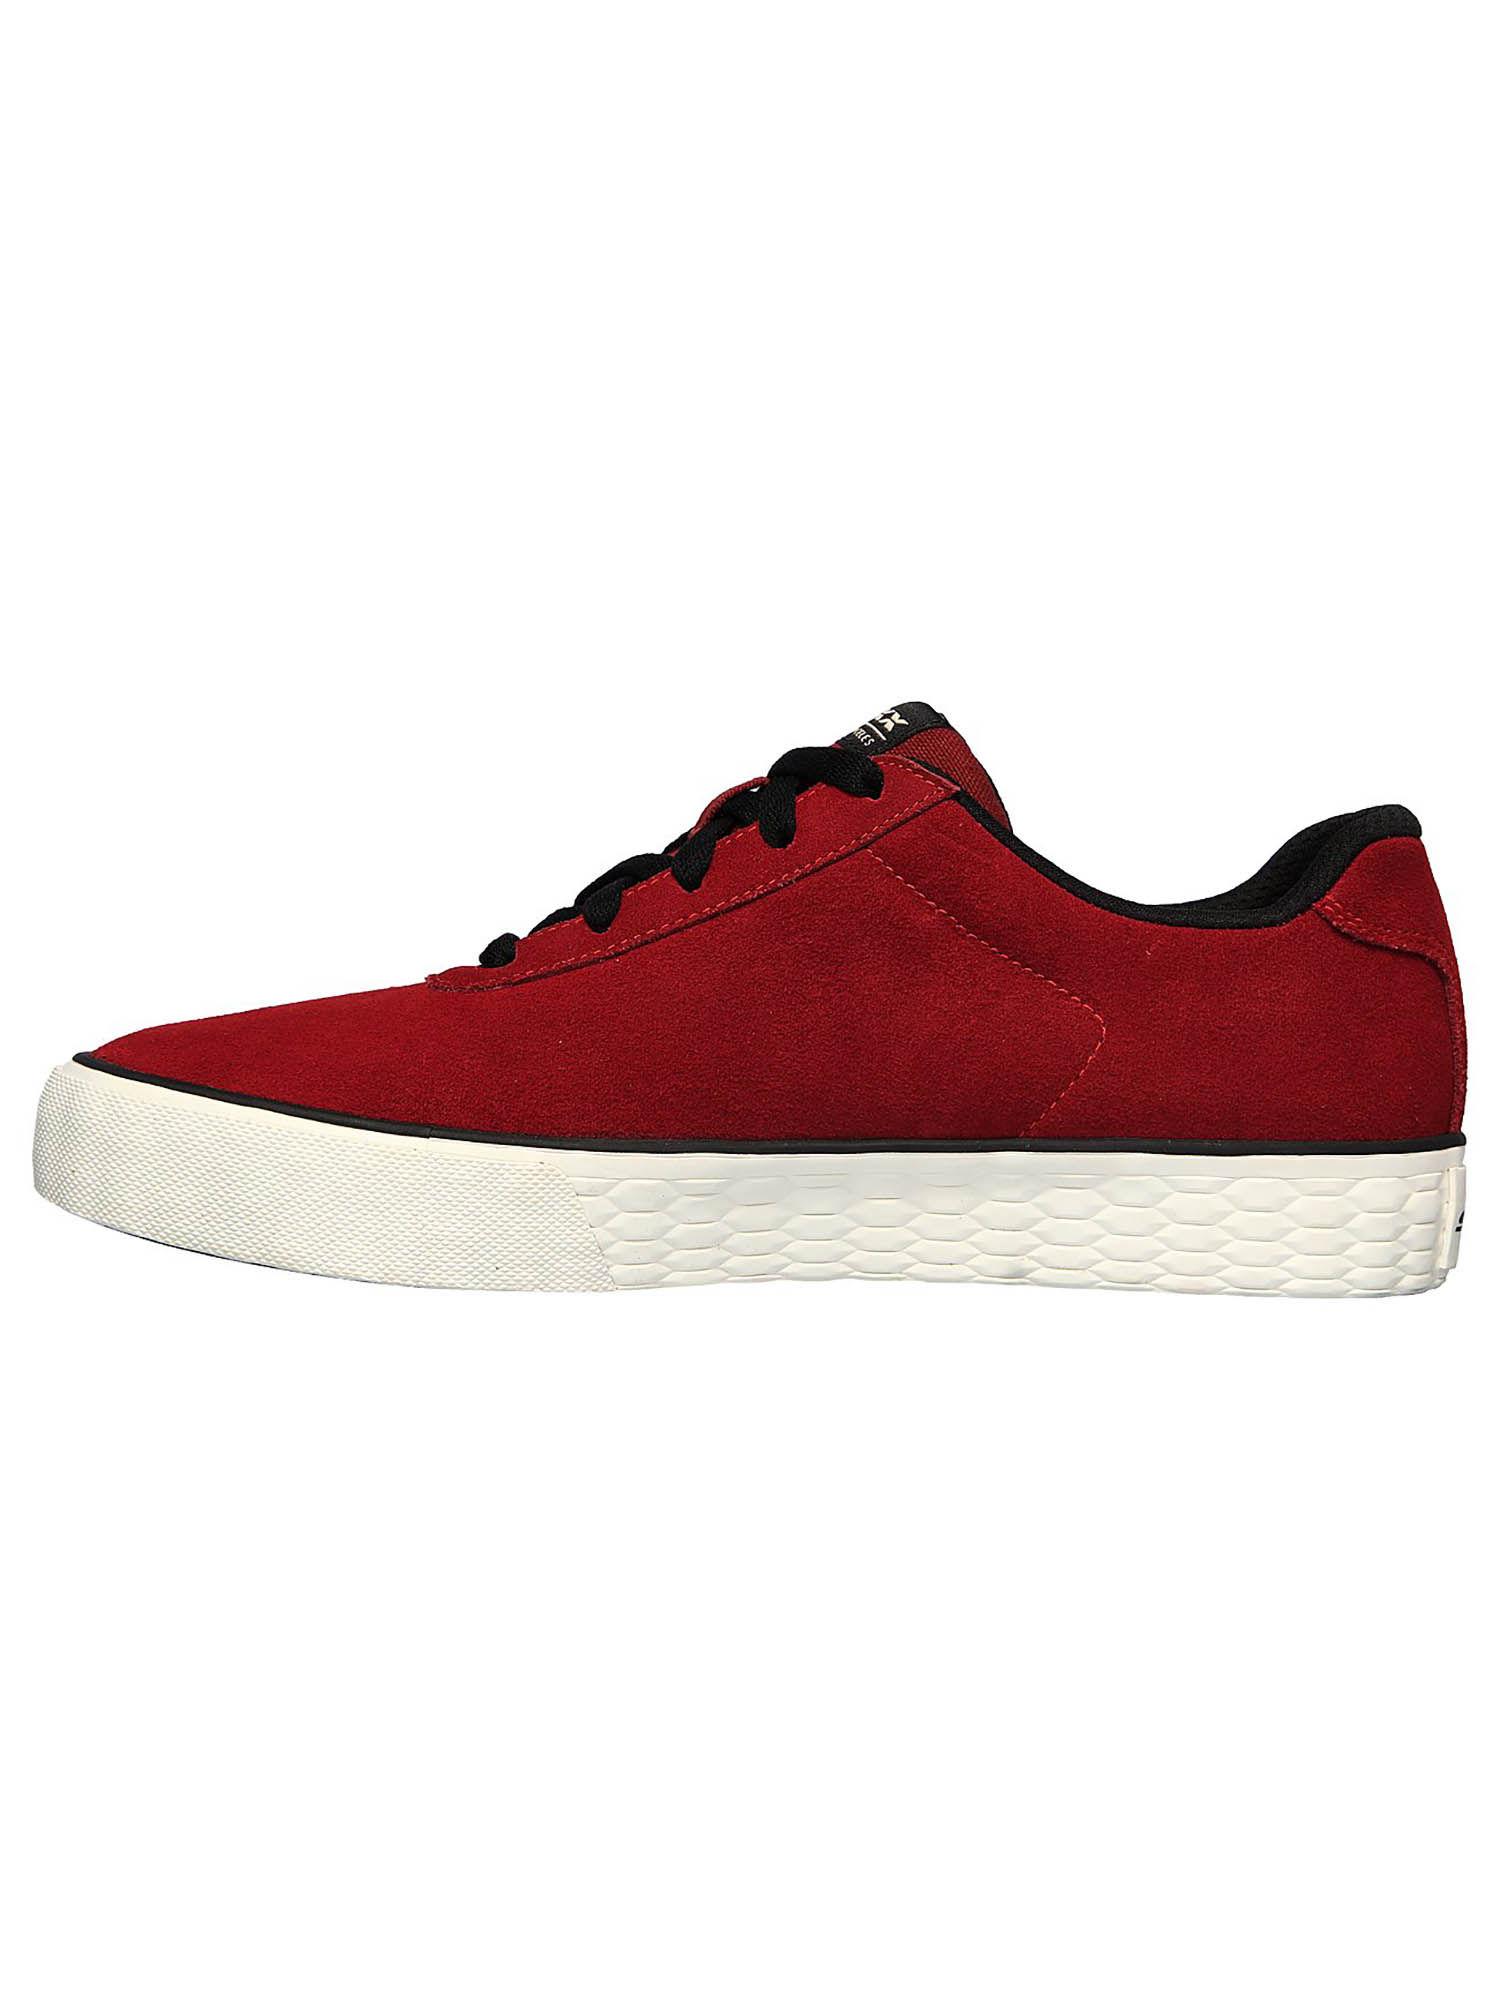 sc bronly maroon casual shoes